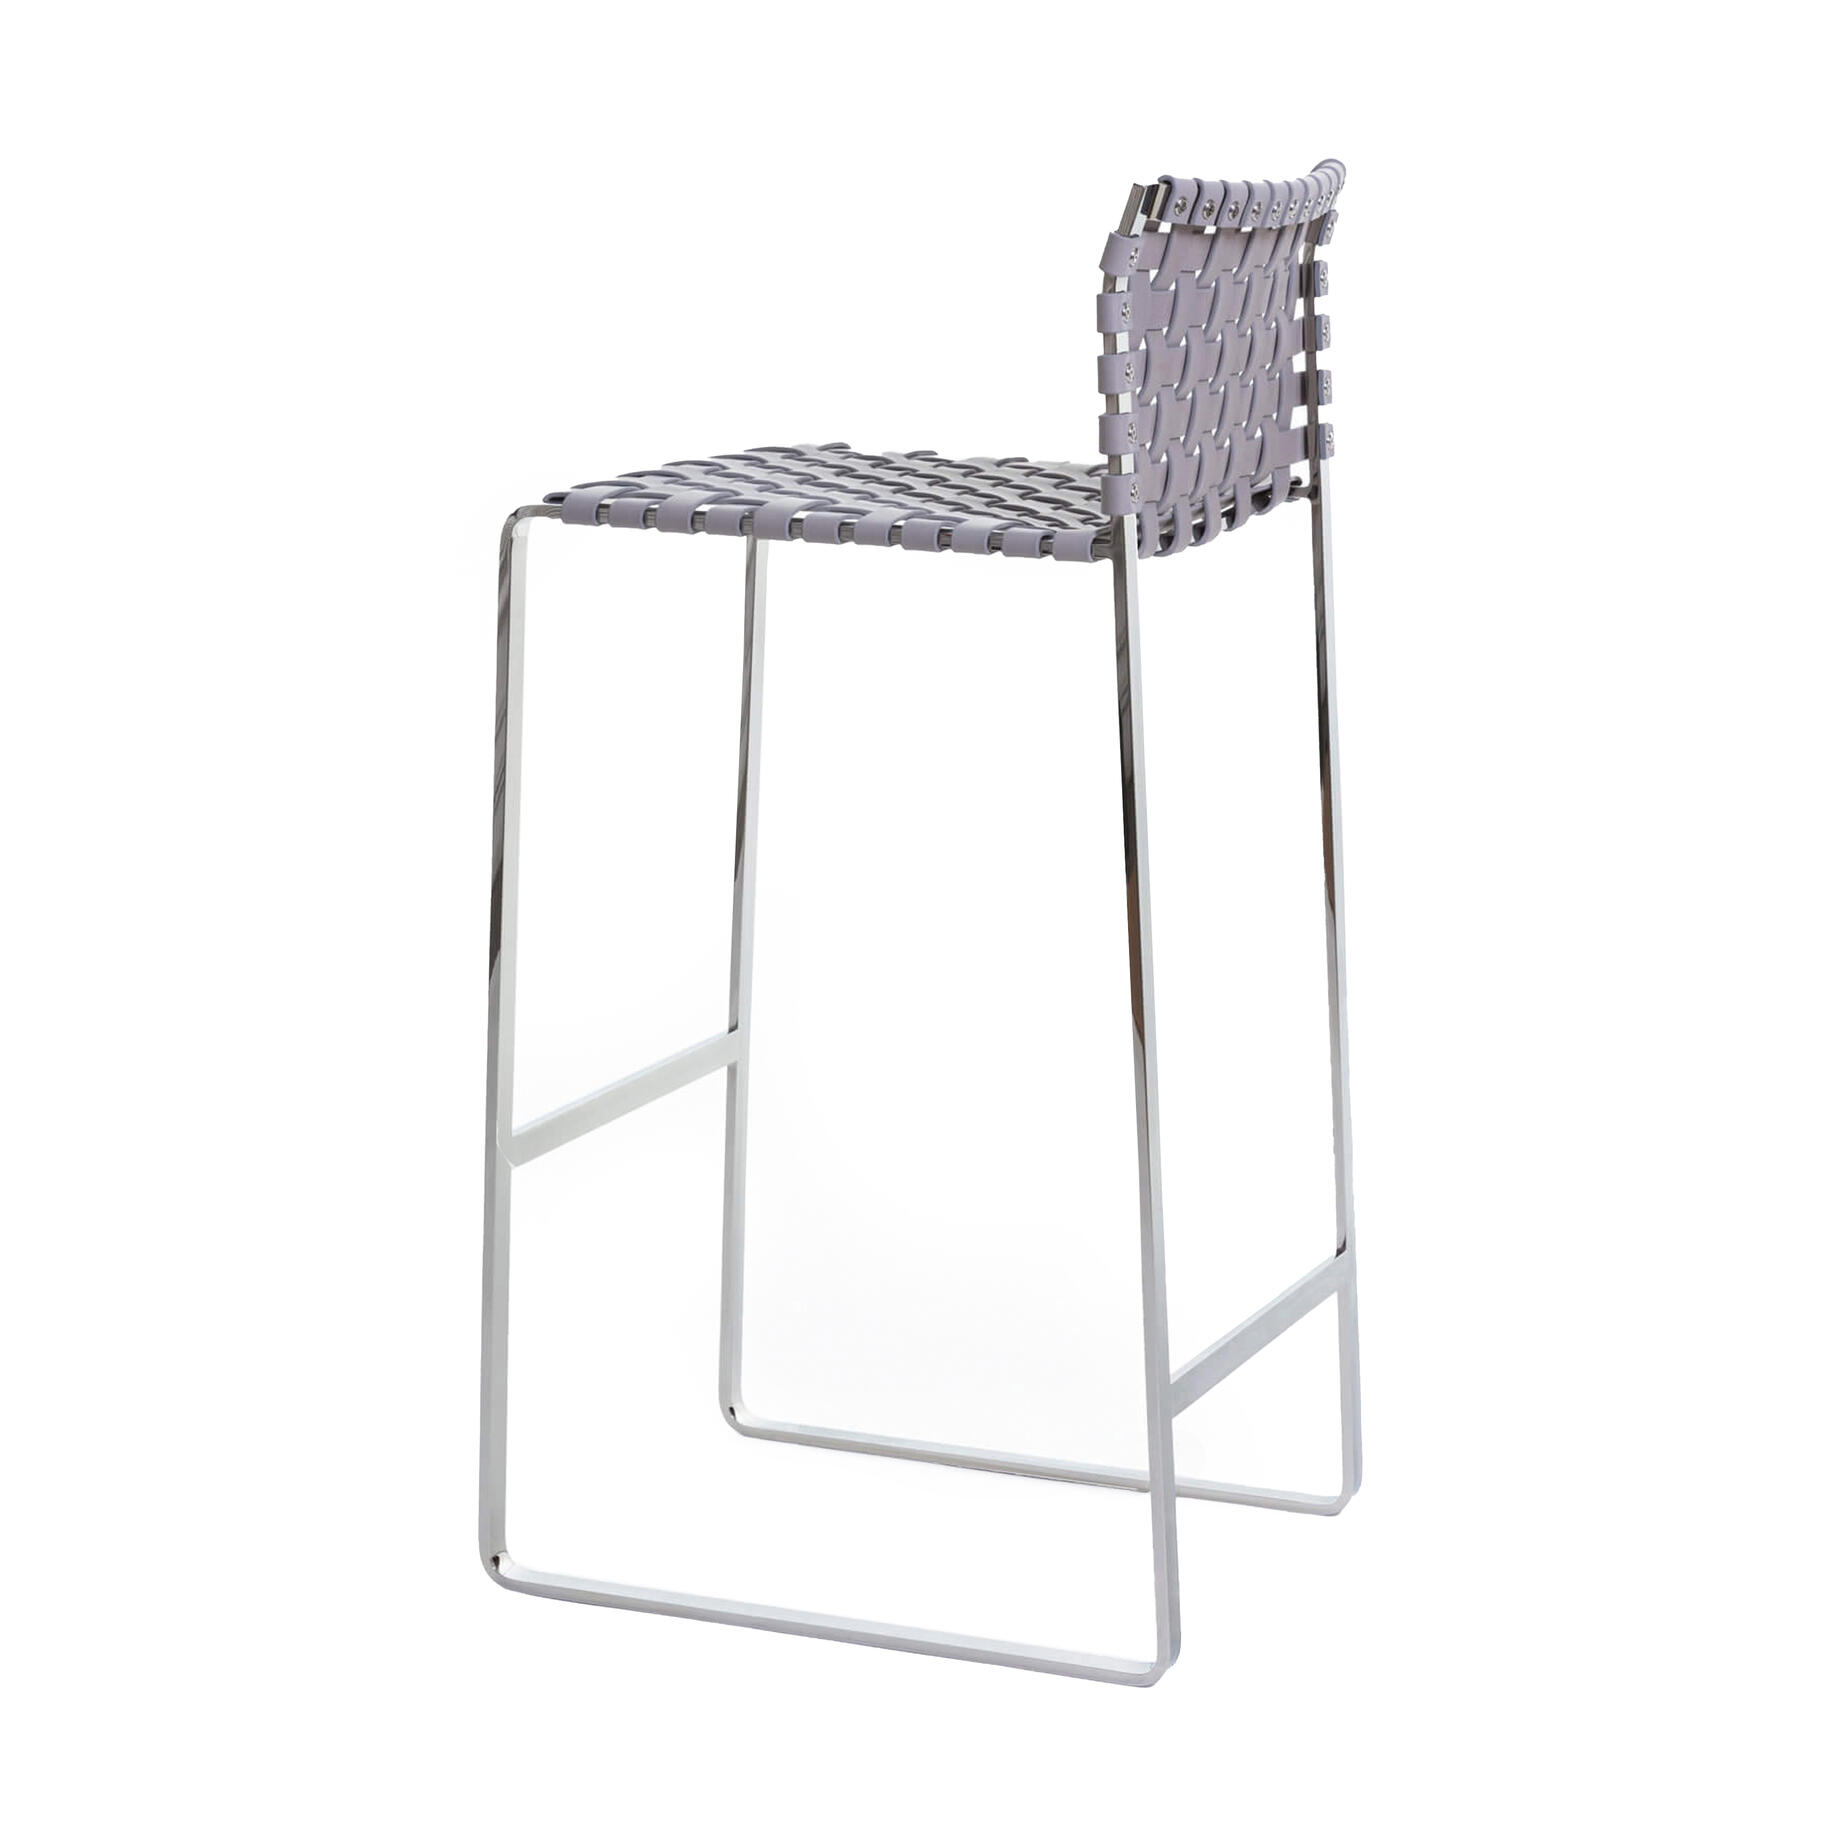 Low Woven Back Bar Stool